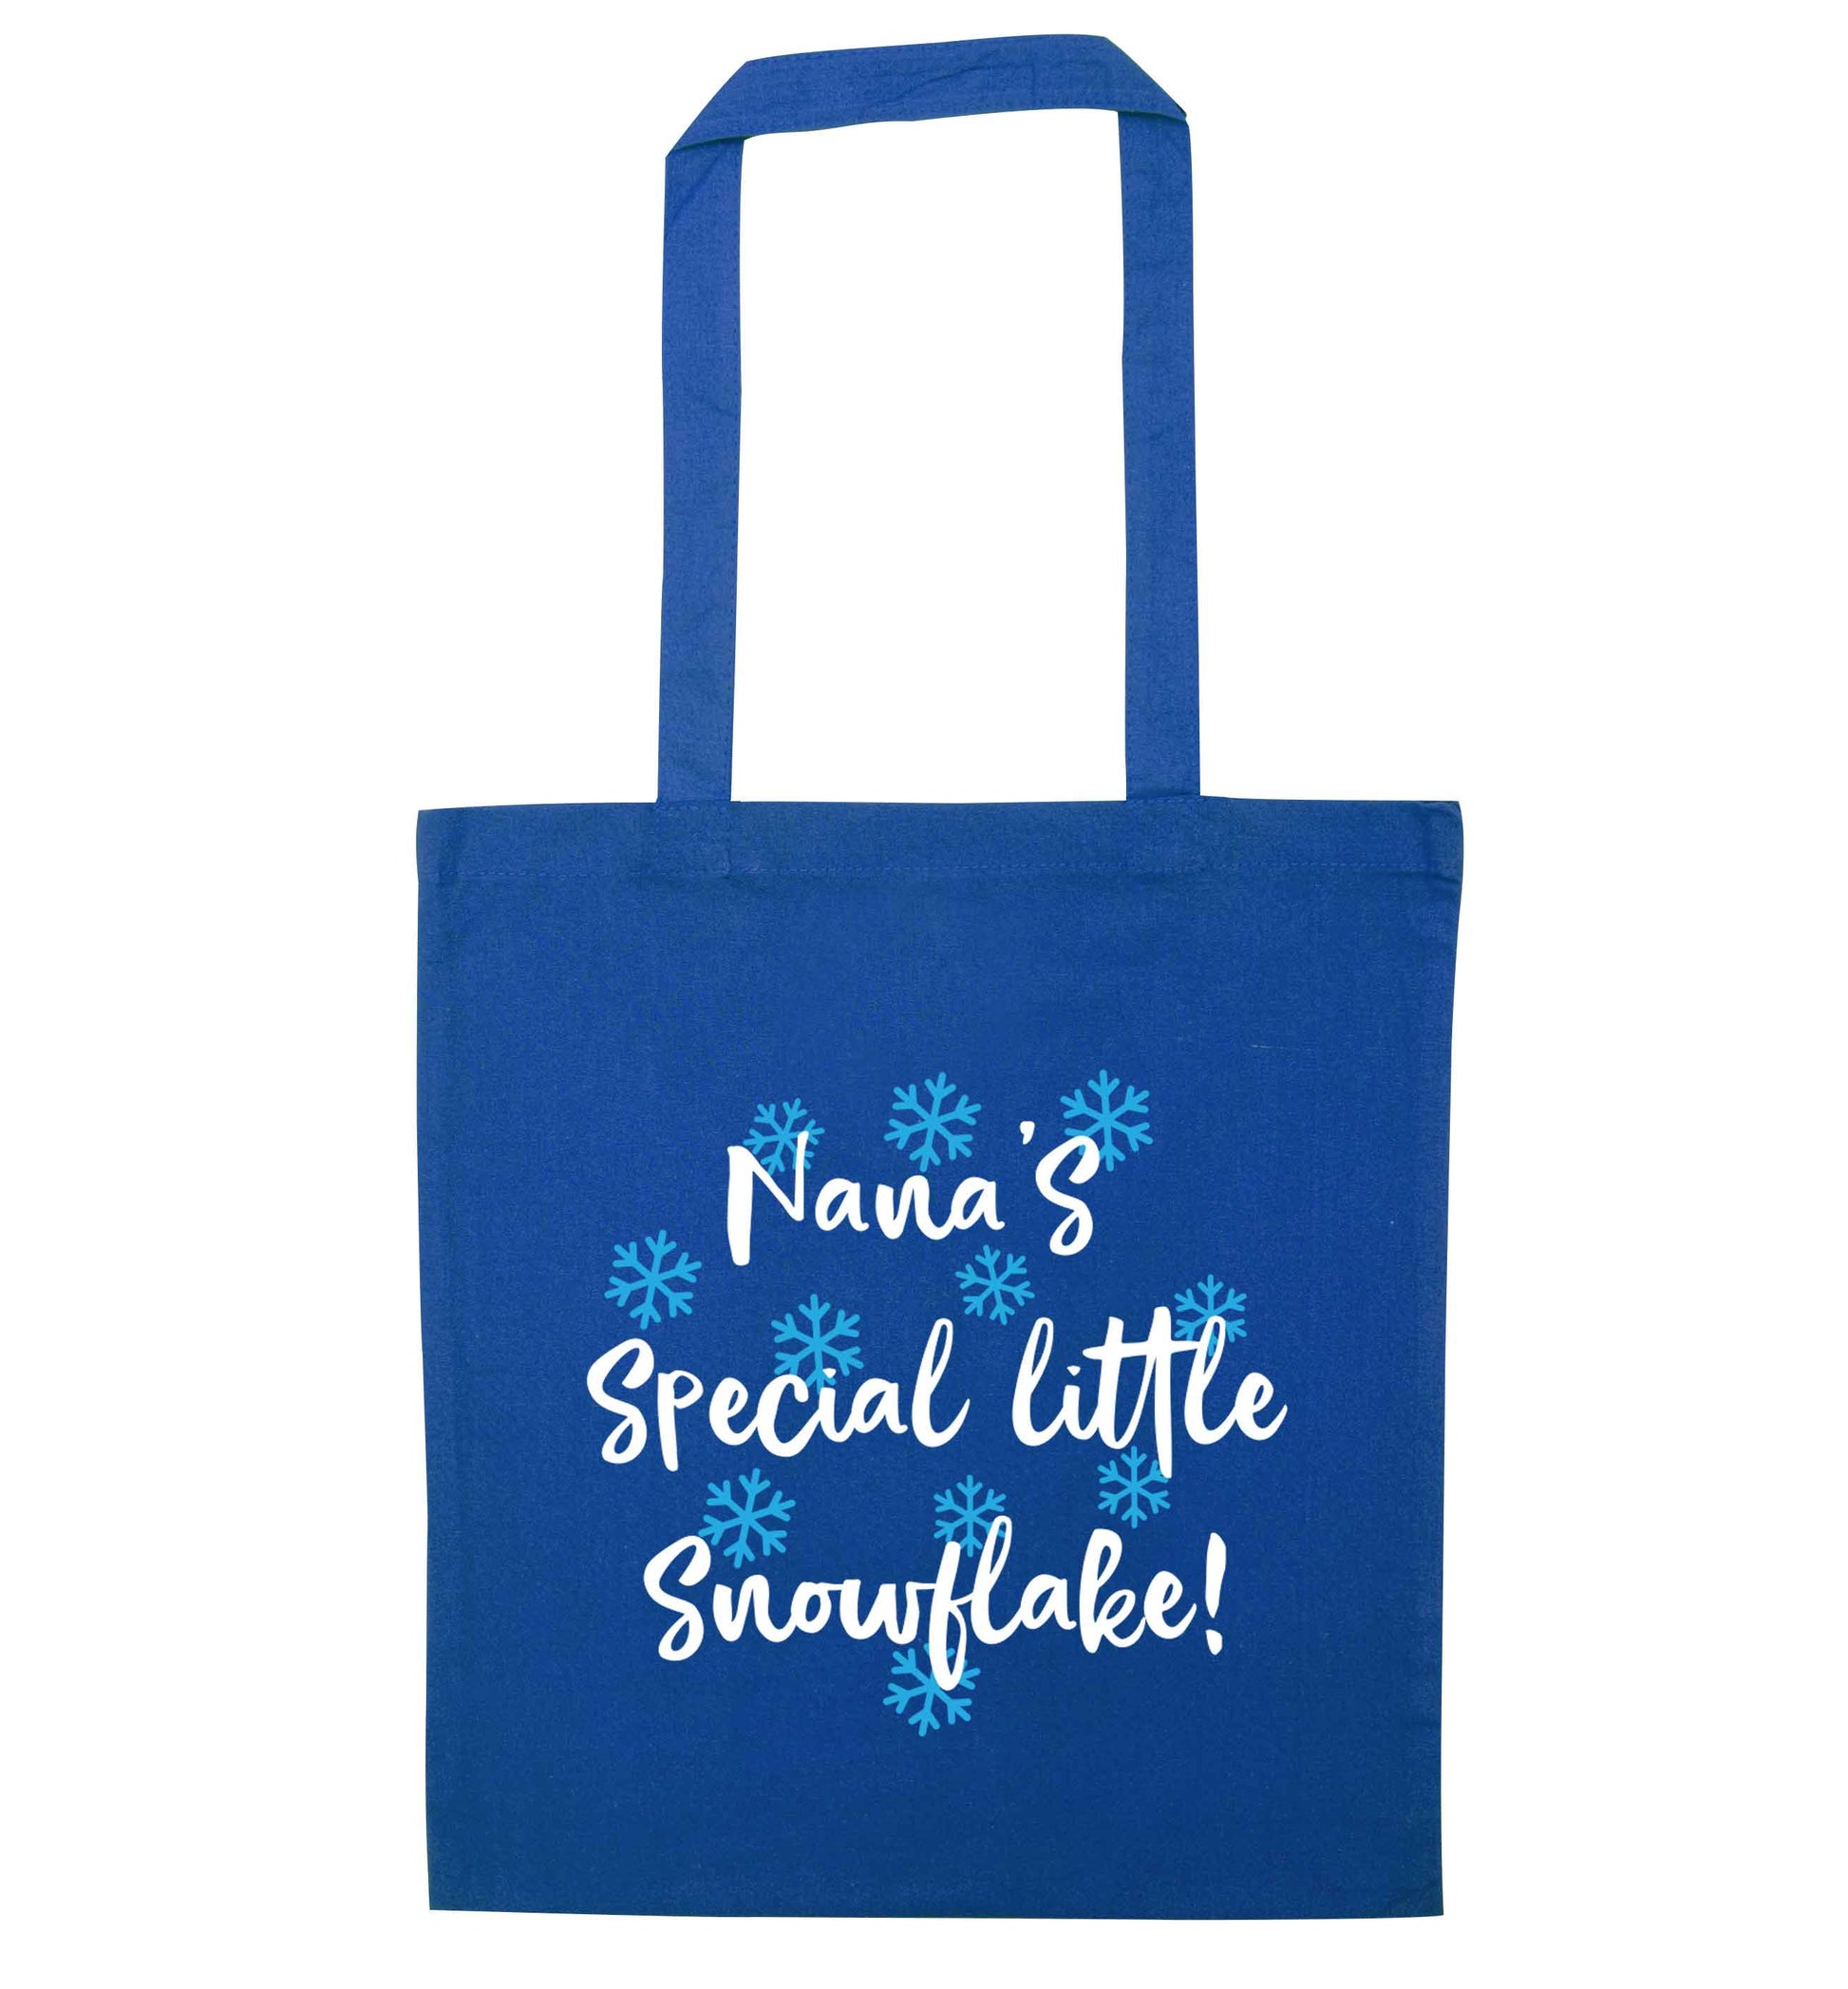 Nana's special little snowflake blue tote bag